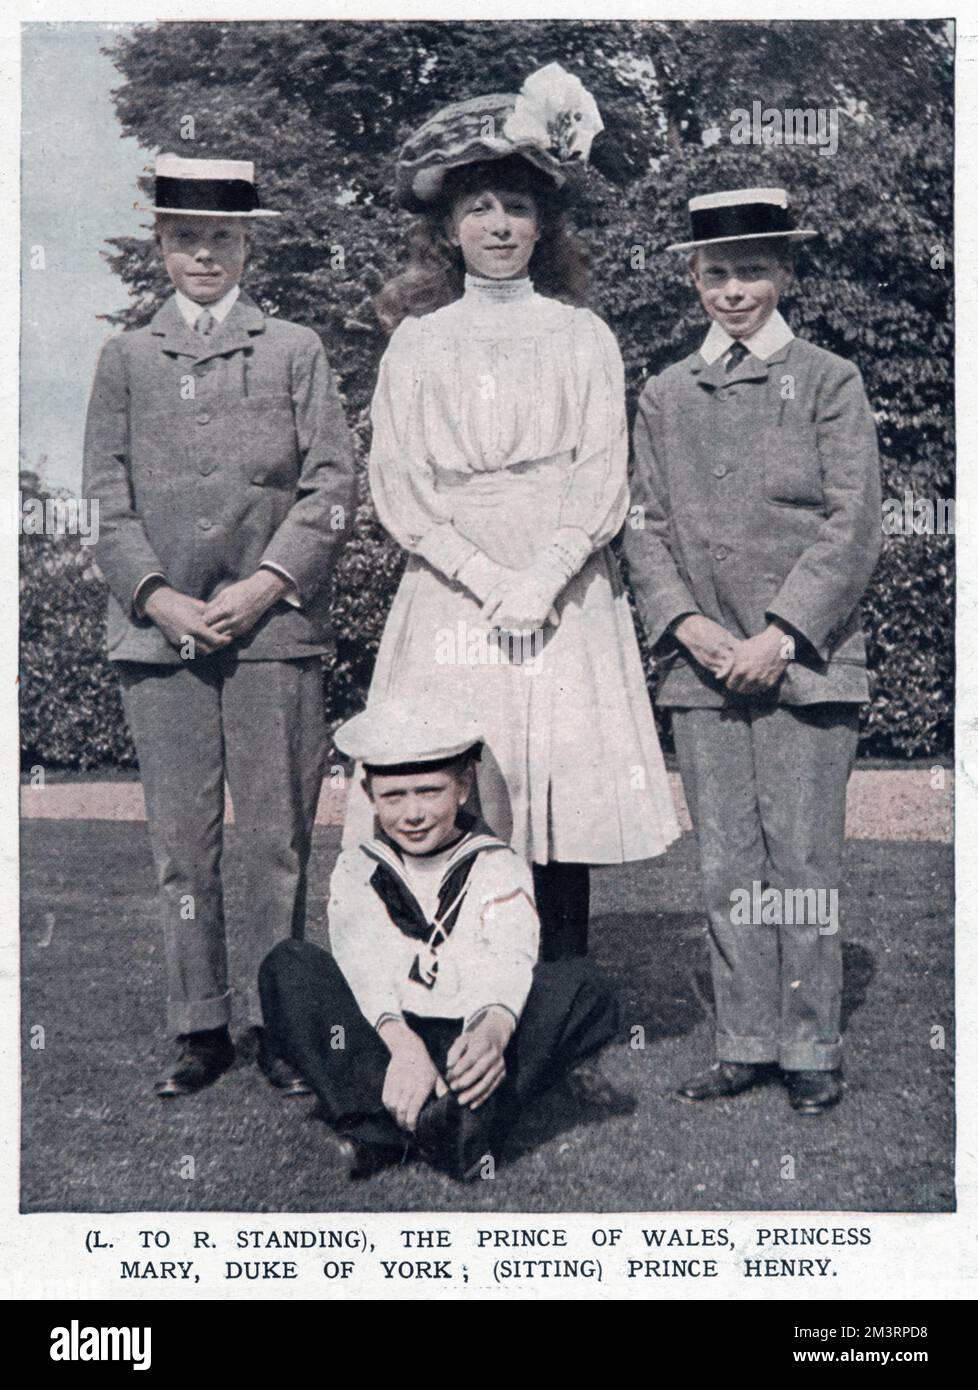 Four eldest children of George V and Mary of Teck, (left) Prince David, sixteenth birthday titled Prince of Wales (future Edward VIII for one year in 1936 and then Duke of Windsor),(1894 - 1972). (middle) Princess Mary in a chair Princess Royal and Countess of Harewood (1897 - 1965). (right) 'Bertie' Prince Albert, Duke of York (future George VI 1936 - 1952), (1895 - 1952). (sitting on floor)  Prince Henry, Duke of Gloucester (1900 - 1974). Stock Photo